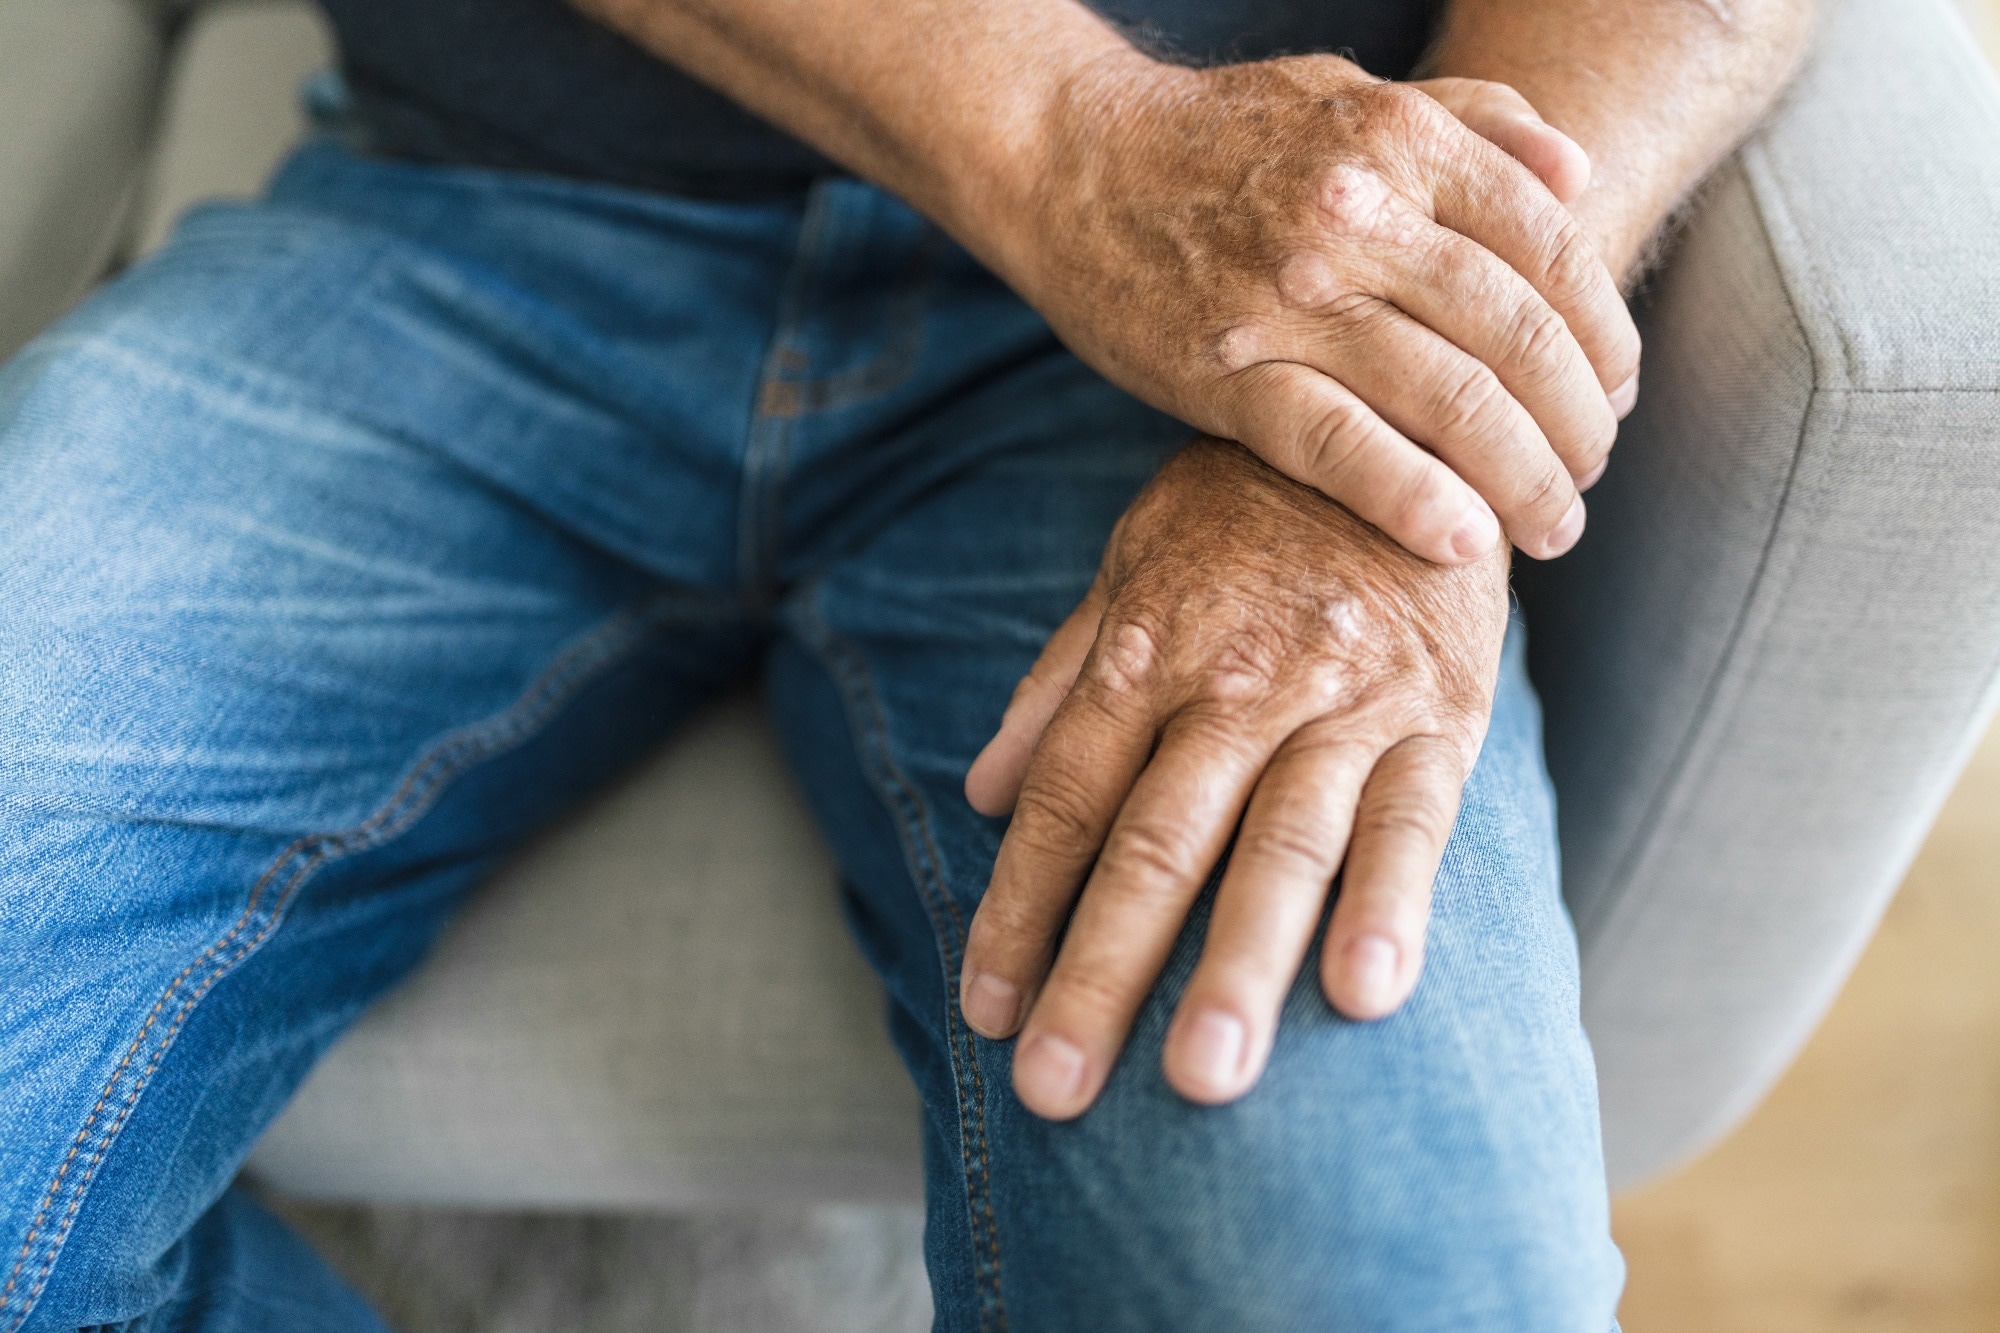 Study: DNA methylation patterns in CD4+ T-cells separate psoriasis patients from healthy controls, and skin psoriasis from psoriatic arthritis. Image Credit: And-One / Shutterstock